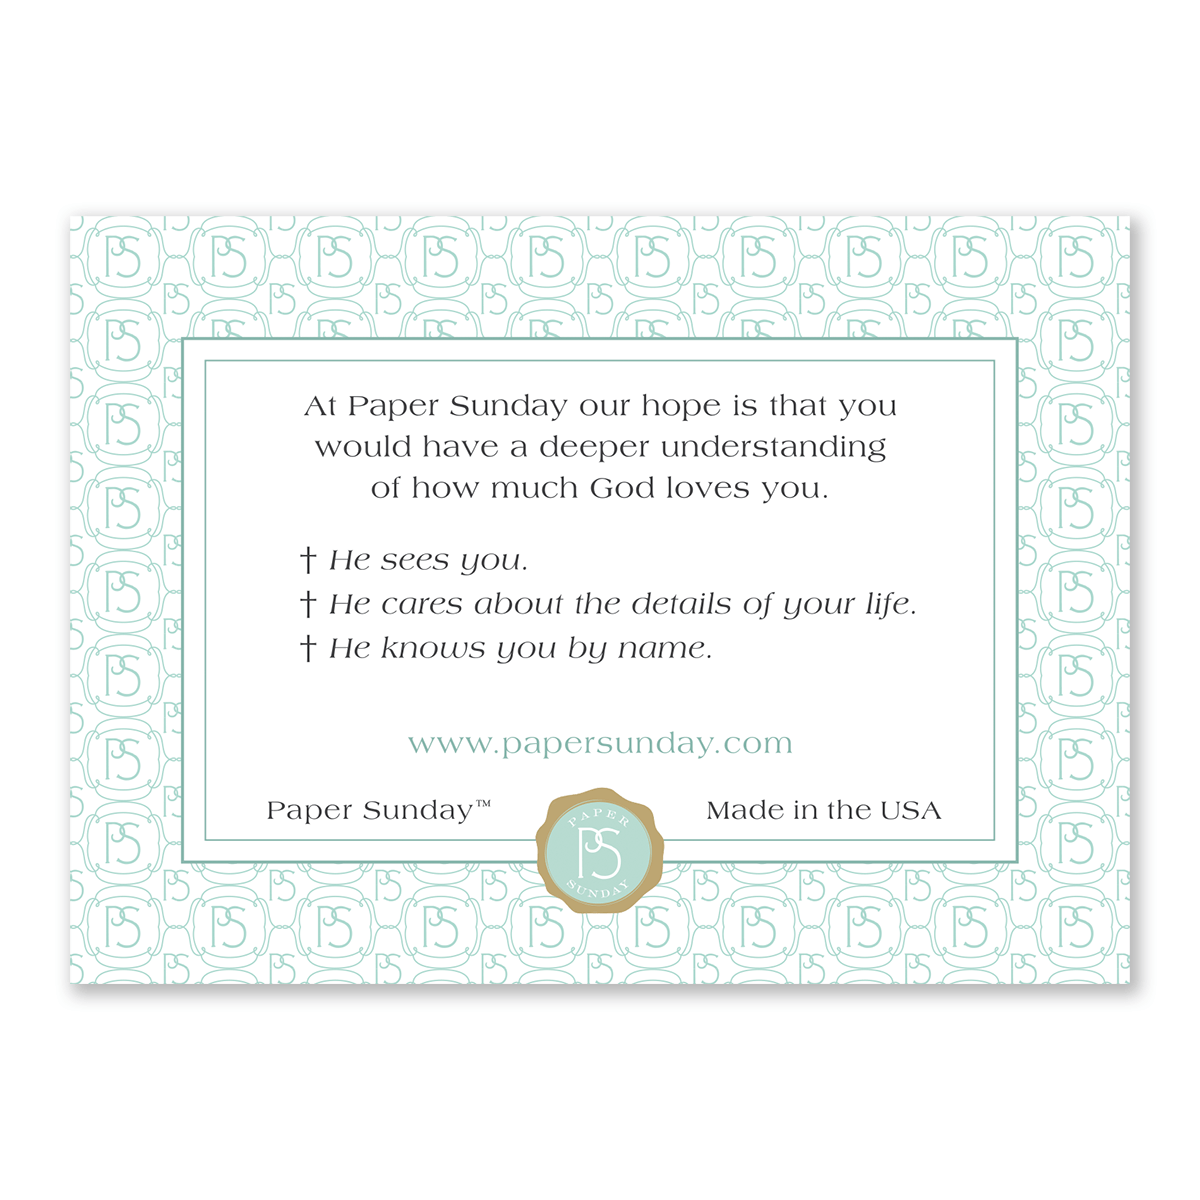 Personalized Prayer Cards make the perfect Christian Gift for the loved ones and friends in your life.  Prayer card, Scripture Notecard, Personalized Prayer Cards, Personalized Scripture, Christian Journal, Christian Planner, Bible Journal, Bible Planner, Prayer Journal, Prayer Planner, Bible Verse Cards